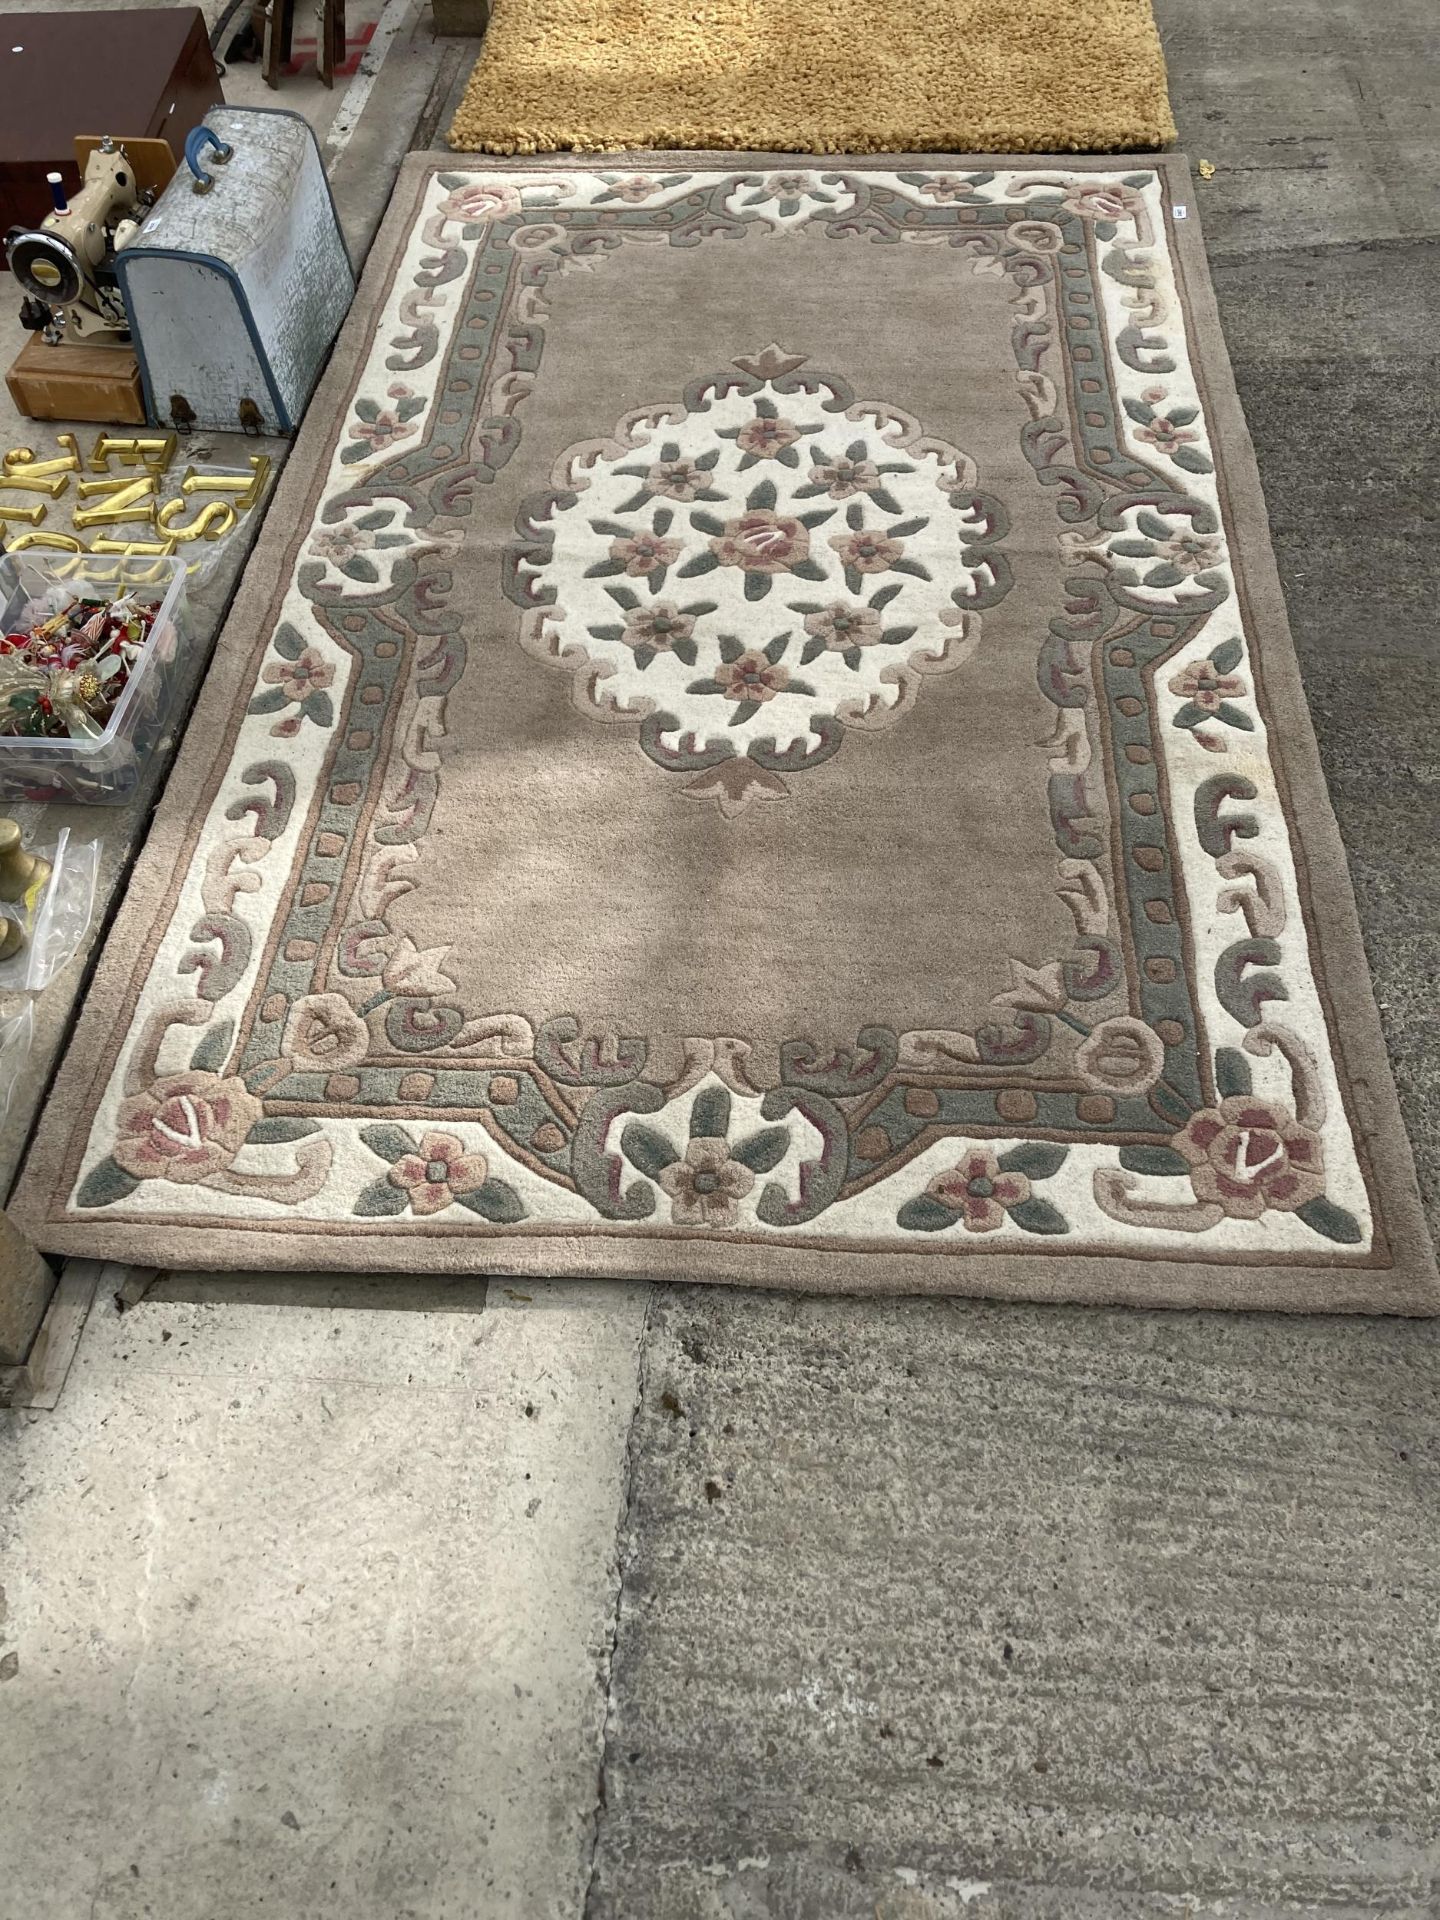 A LARGE PINK AND CREAM PATTERNED RUG